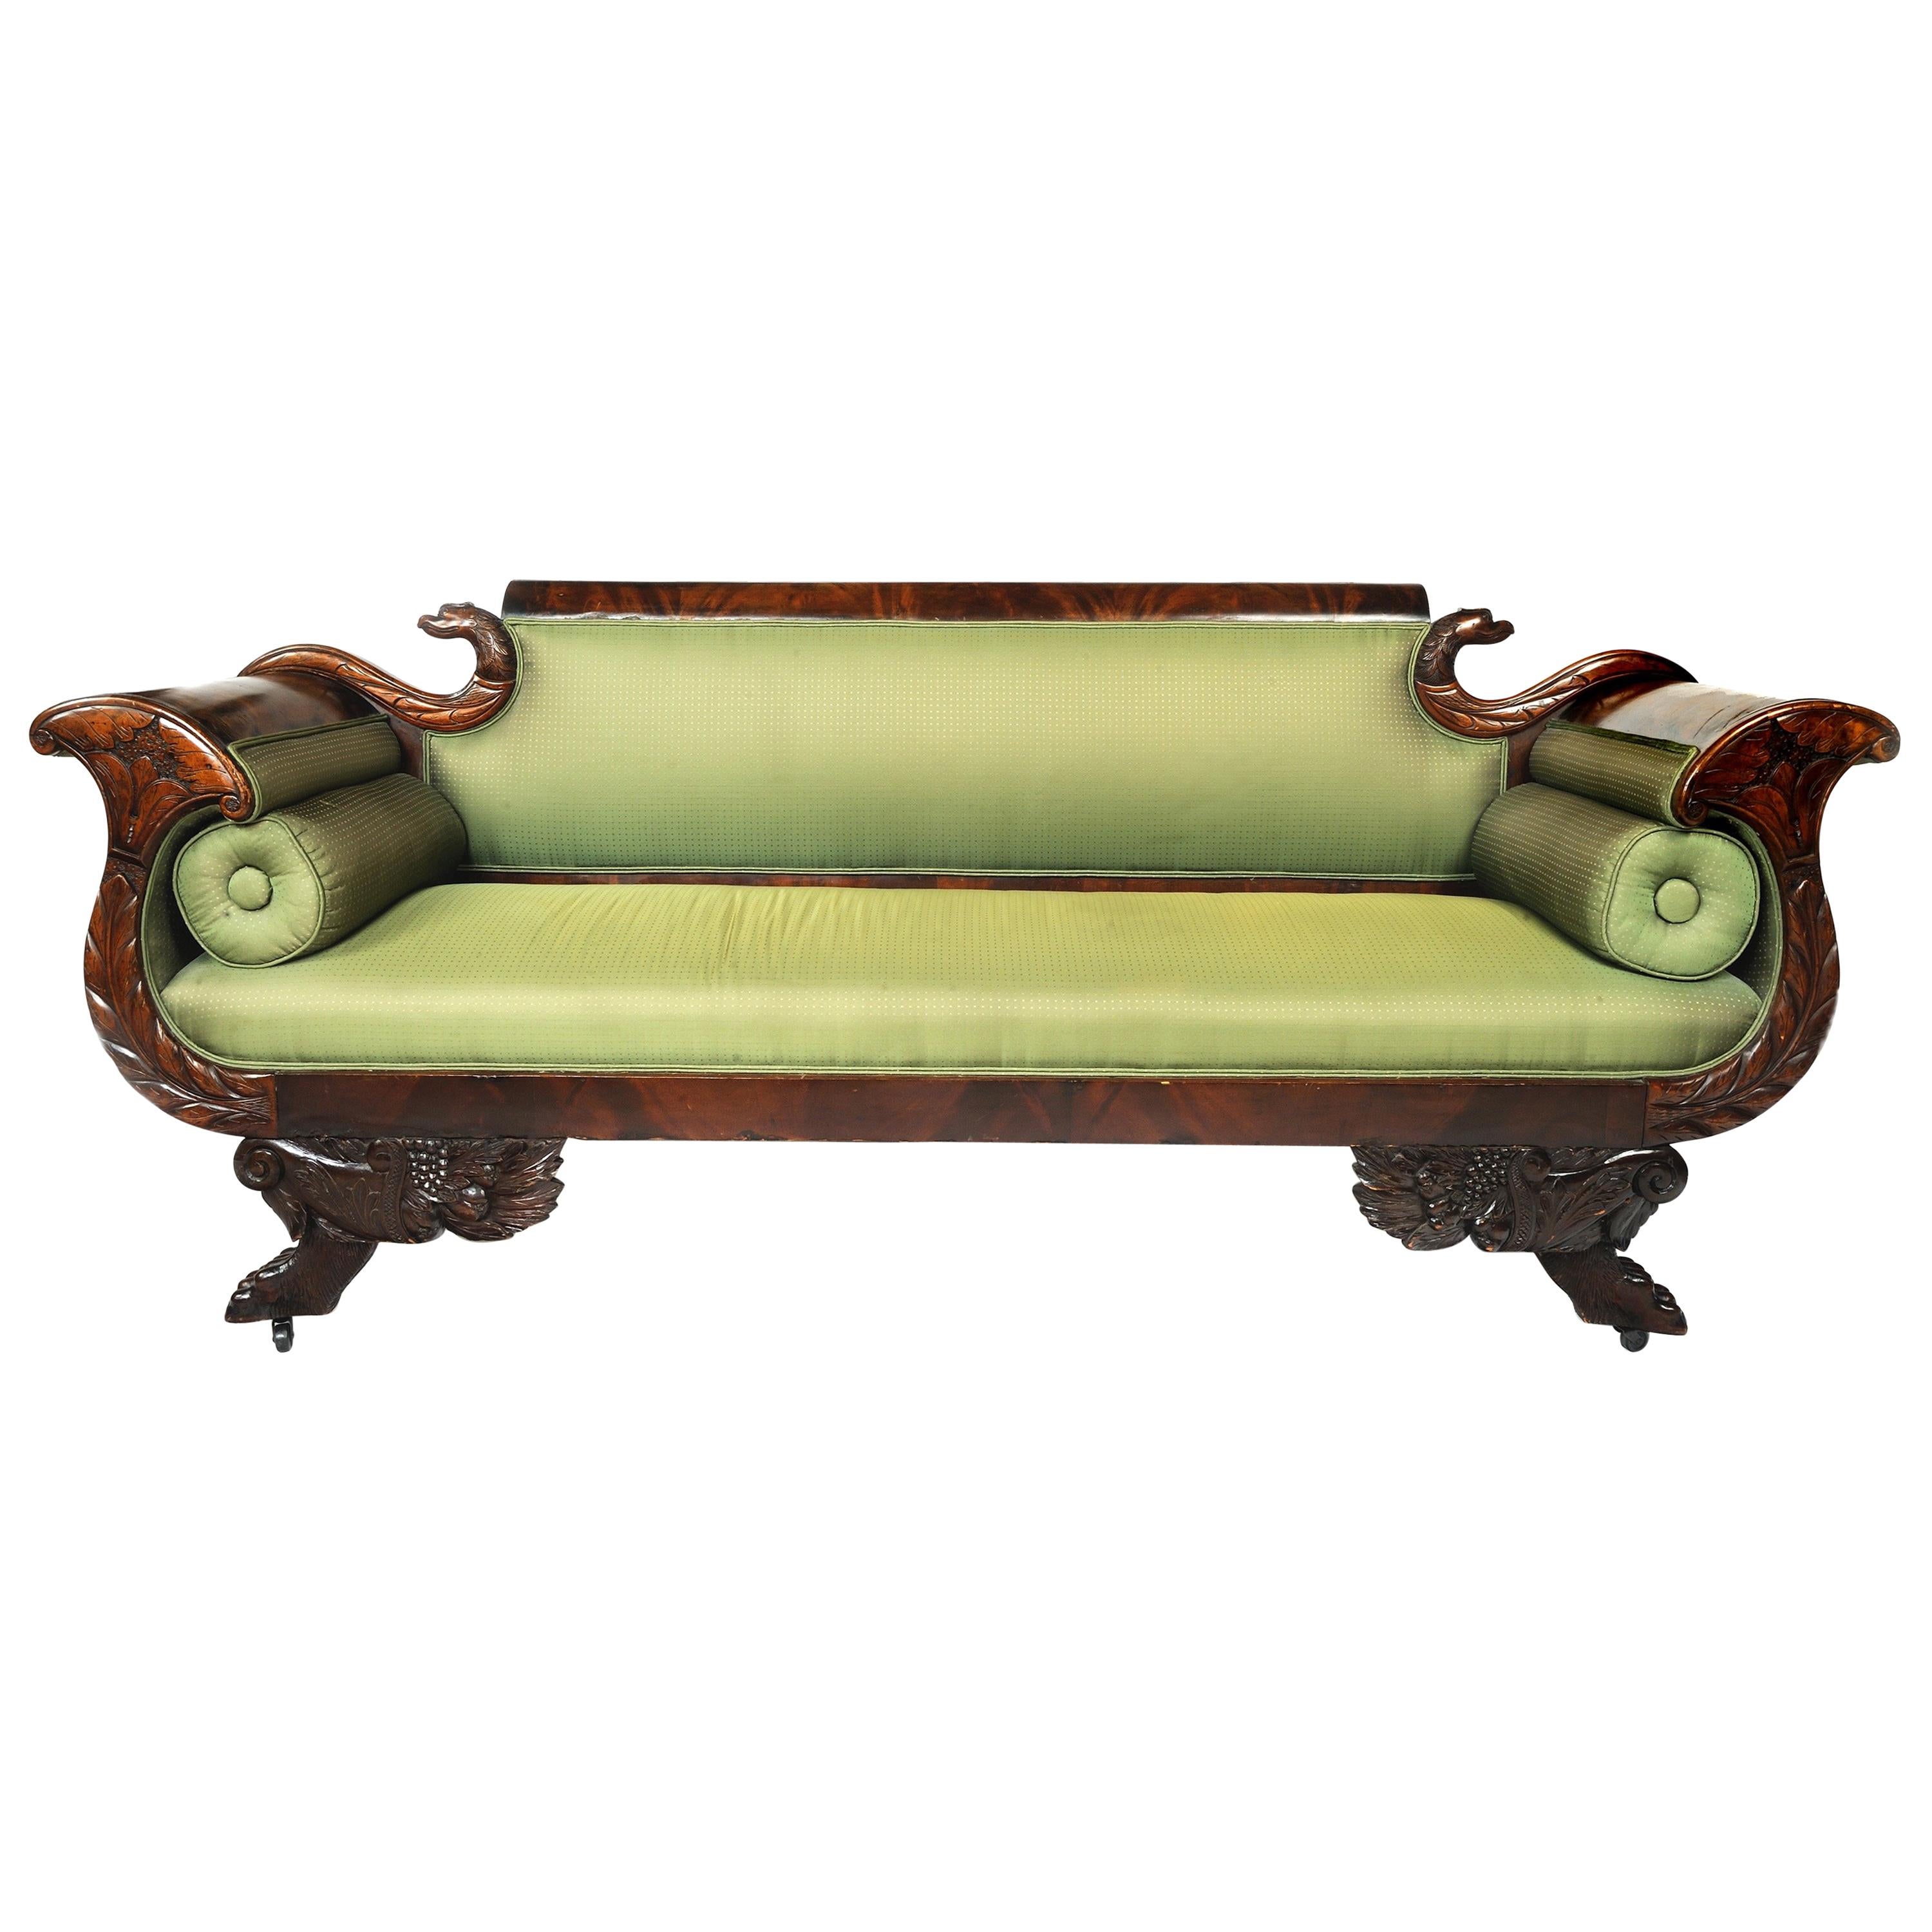 19th Century American Empire Sofa with Carved Eagle Heads and Hair Paw Feet